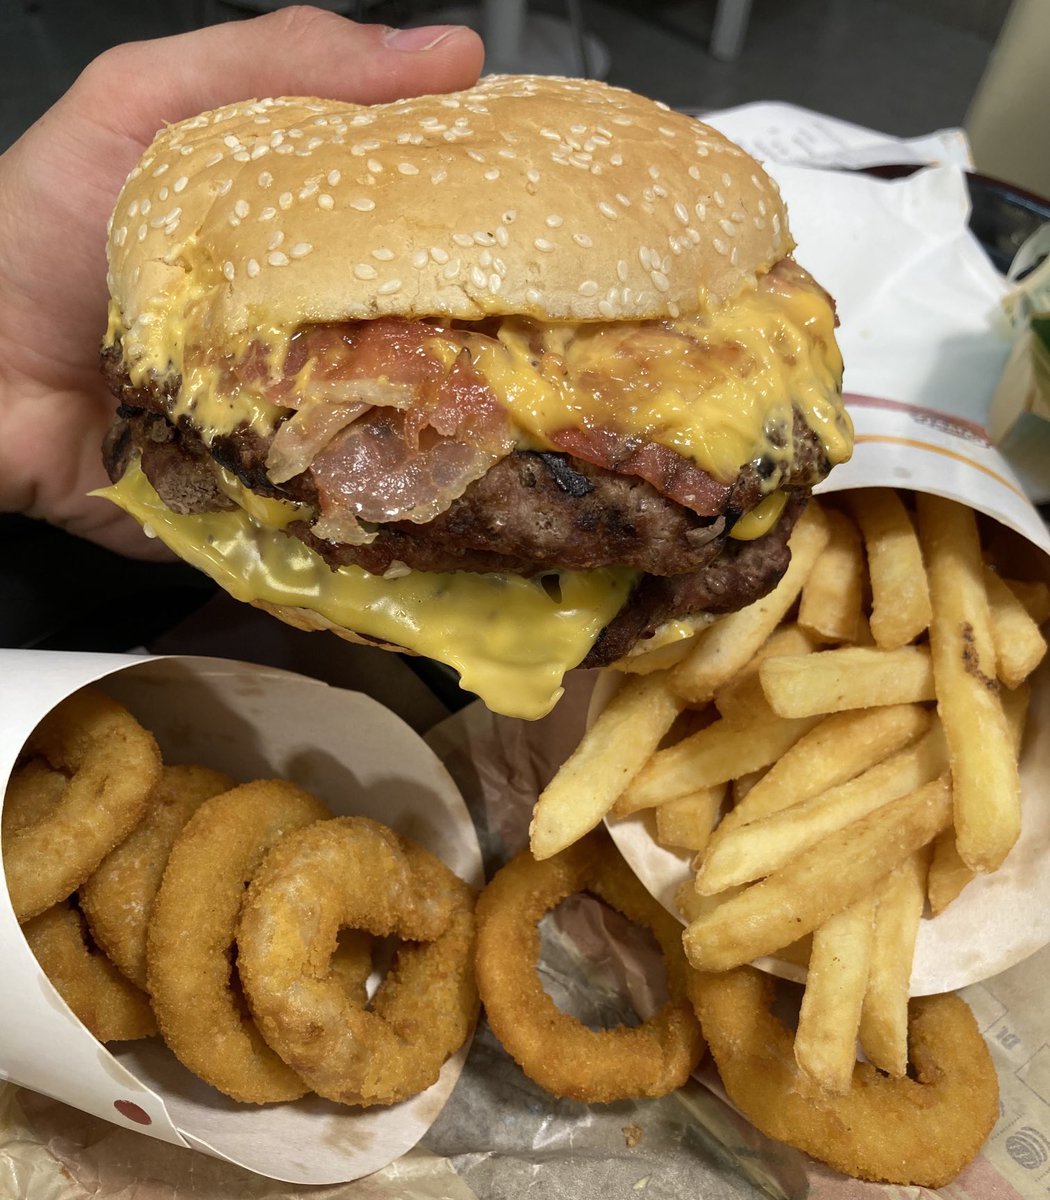 Bacon Cheeseburger, fries, and onion rings 🍔 🍟